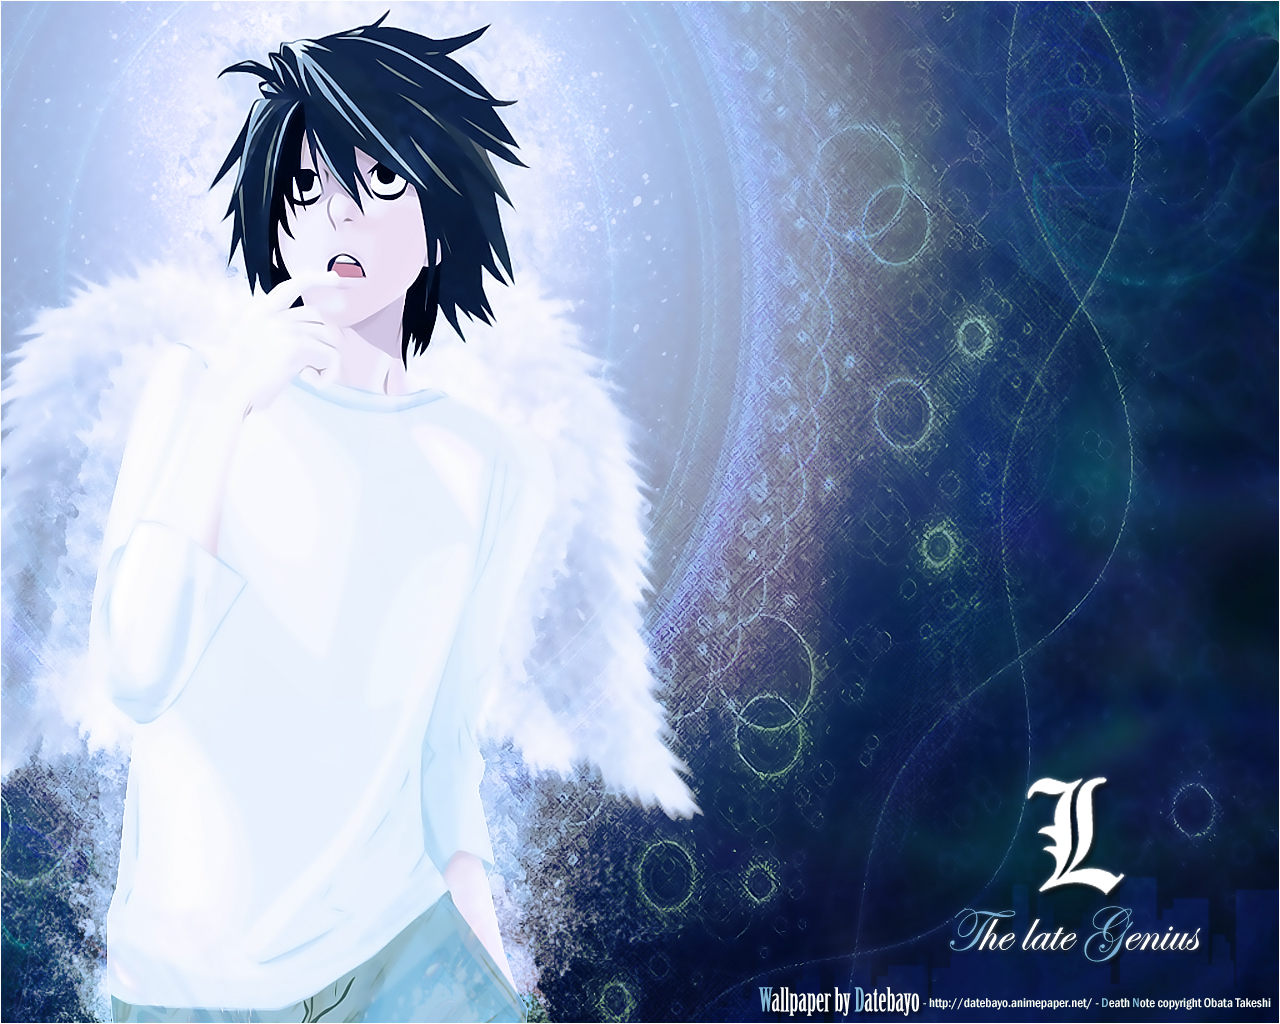 l (death note), anime, death note Full HD